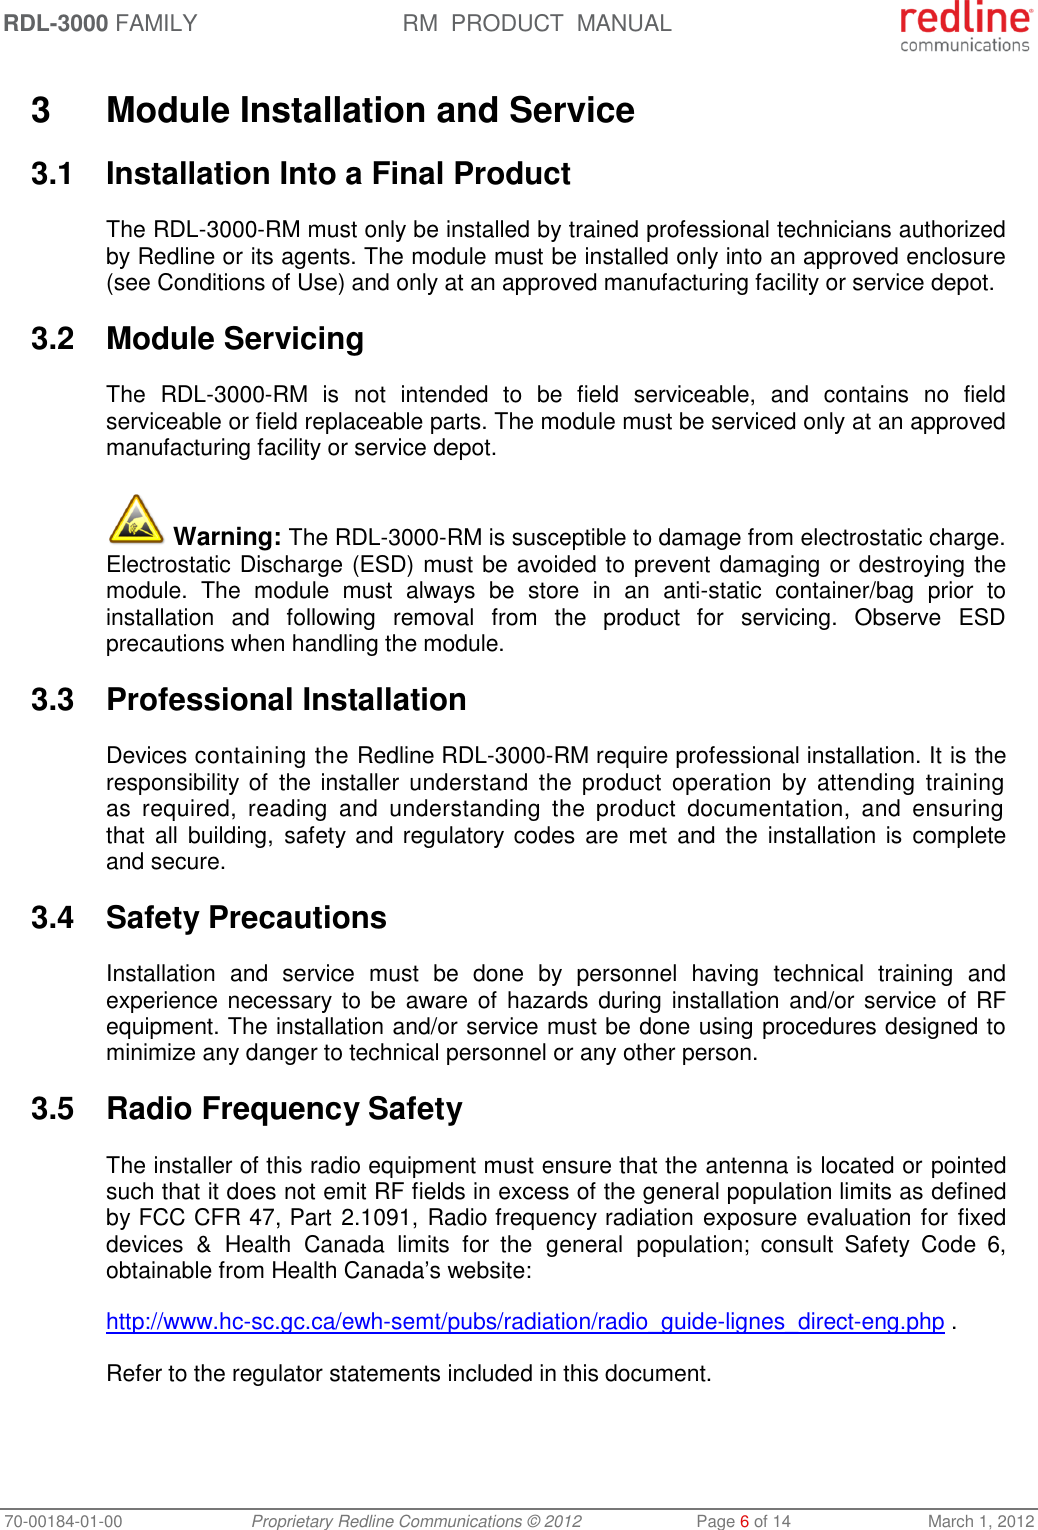 RDL-3000 FAMILY RM  PRODUCT  MANUAL 70-00184-01-00 Proprietary Redline Communications © 2012  Page 6 of 14  March 1, 2012  3  Module Installation and Service 3.1  Installation Into a Final Product The RDL-3000-RM must only be installed by trained professional technicians authorized by Redline or its agents. The module must be installed only into an approved enclosure (see Conditions of Use) and only at an approved manufacturing facility or service depot. 3.2  Module Servicing The  RDL-3000-RM  is  not  intended  to  be  field  serviceable,  and  contains  no  field serviceable or field replaceable parts. The module must be serviced only at an approved manufacturing facility or service depot.  Warning: The RDL-3000-RM is susceptible to damage from electrostatic charge. Electrostatic Discharge (ESD) must be avoided to prevent damaging or destroying the module.  The  module  must  always  be  store  in  an  anti-static  container/bag  prior  to installation  and  following  removal  from  the  product  for  servicing.  Observe  ESD precautions when handling the module. 3.3  Professional Installation Devices containing the Redline RDL-3000-RM require professional installation. It is the responsibility of  the installer  understand  the  product  operation  by  attending  training as  required,  reading  and  understanding  the  product  documentation,  and  ensuring that  all  building, safety and regulatory codes  are  met and  the  installation is  complete and secure. 3.4  Safety Precautions  Installation  and  service  must  be  done  by  personnel  having  technical  training  and experience necessary to be aware of  hazards during installation and/or service  of  RF equipment. The installation and/or service must be done using procedures designed to minimize any danger to technical personnel or any other person.  3.5  Radio Frequency Safety The installer of this radio equipment must ensure that the antenna is located or pointed such that it does not emit RF fields in excess of the general population limits as defined by FCC CFR 47, Part 2.1091, Radio frequency radiation exposure evaluation for  fixed devices  &amp;  Health Canada  limits  for  the  general  population;  consult  Safety  Code  6, obtainable from Health Canada’s website: http://www.hc-sc.gc.ca/ewh-semt/pubs/radiation/radio_guide-lignes_direct-eng.php . Refer to the regulator statements included in this document. 